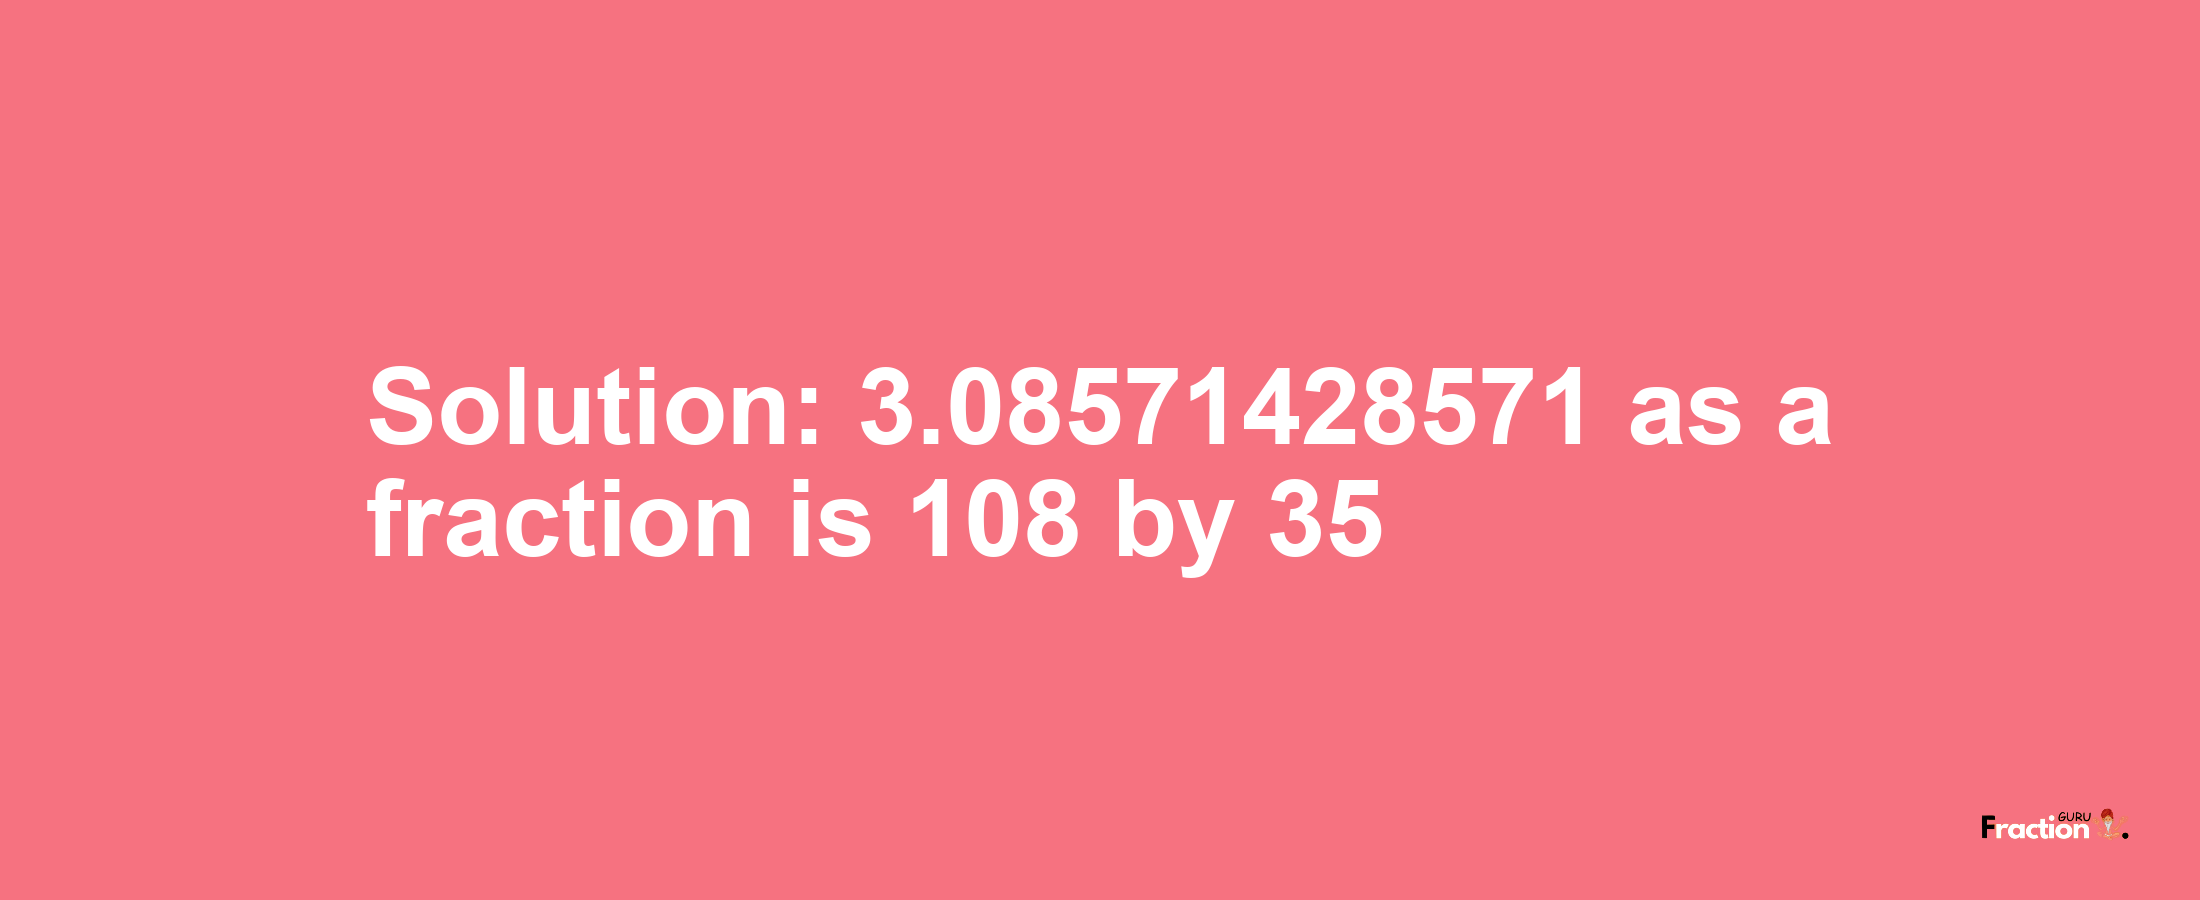 Solution:3.08571428571 as a fraction is 108/35